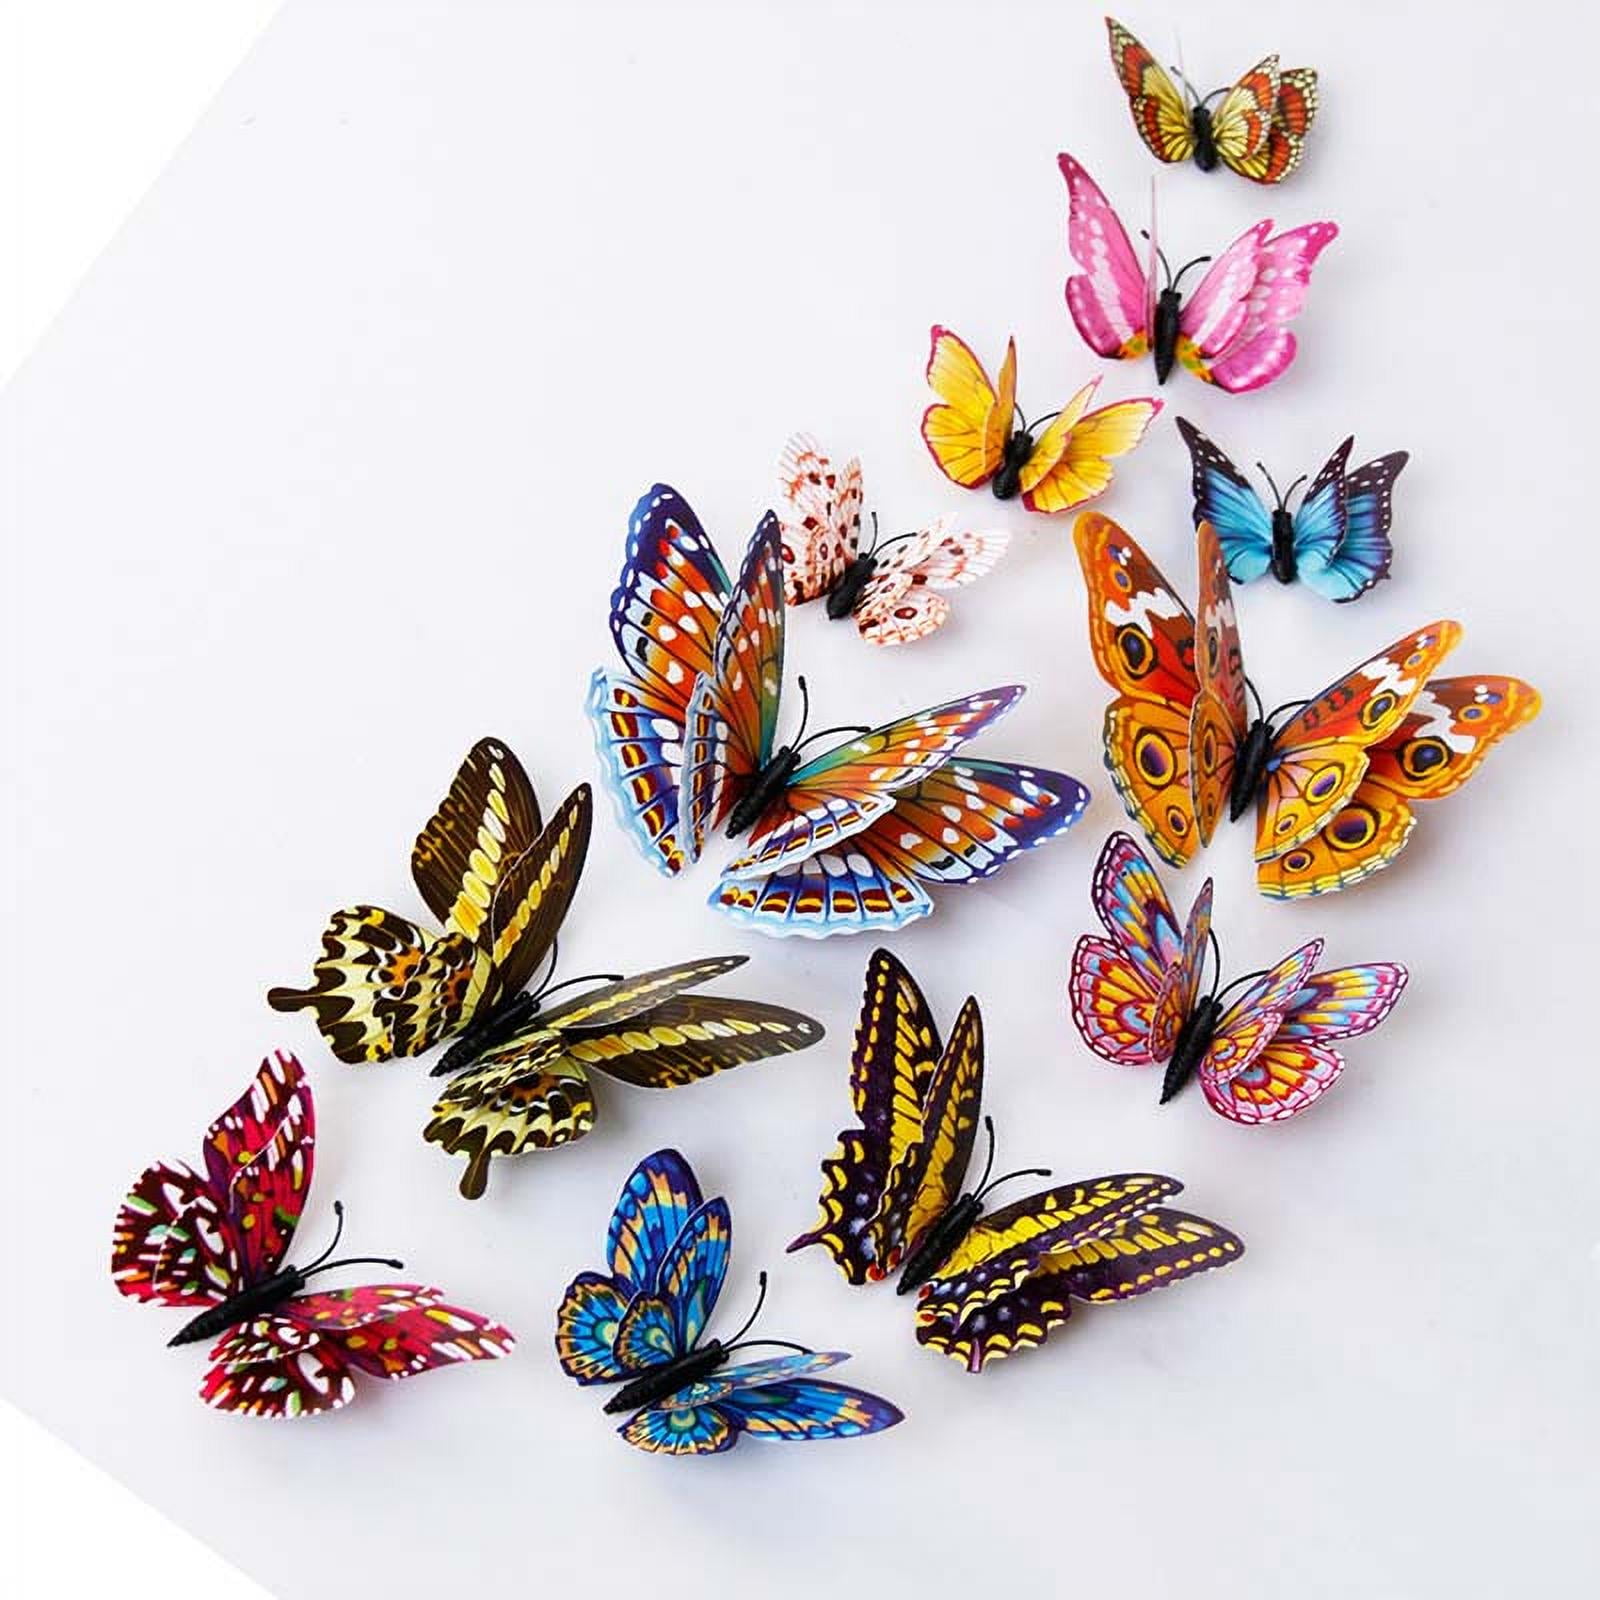 120pcs 3D Colorful Butterfly Wall Stickers Decals Removable Butterflies DIY Art Decor Crafts for Party Offices Bedroom Room at MechanicSurplus.com